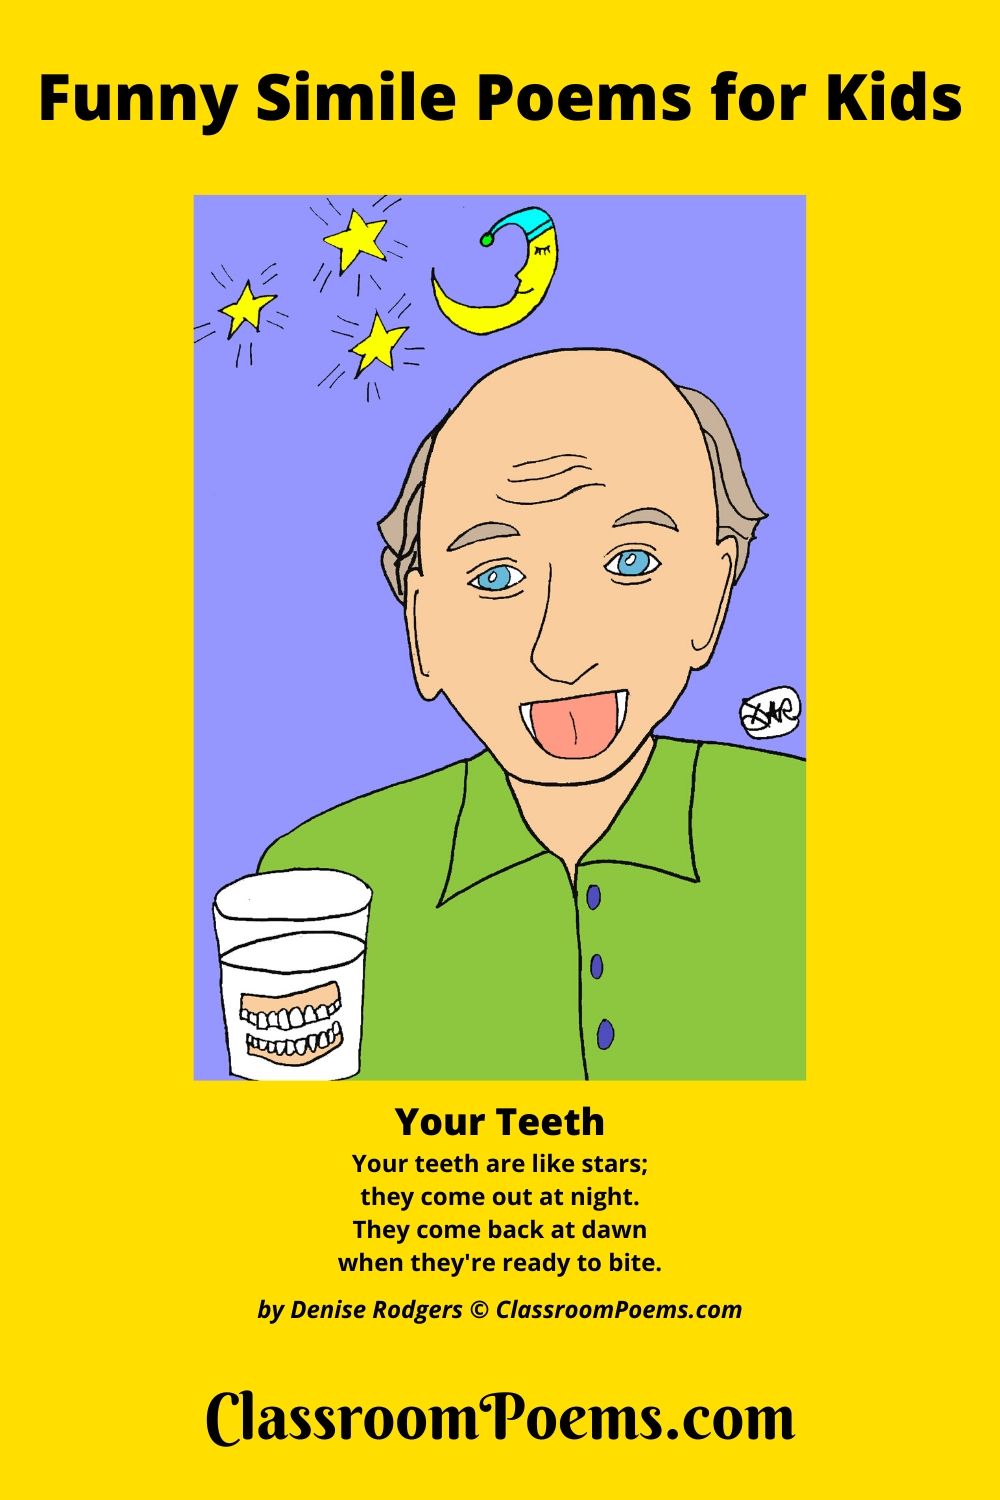 Man with dentures. Man with false teeth. Teeth in glass. Funny simile poems by Denise Rodgers on ClassroomPoems.com.